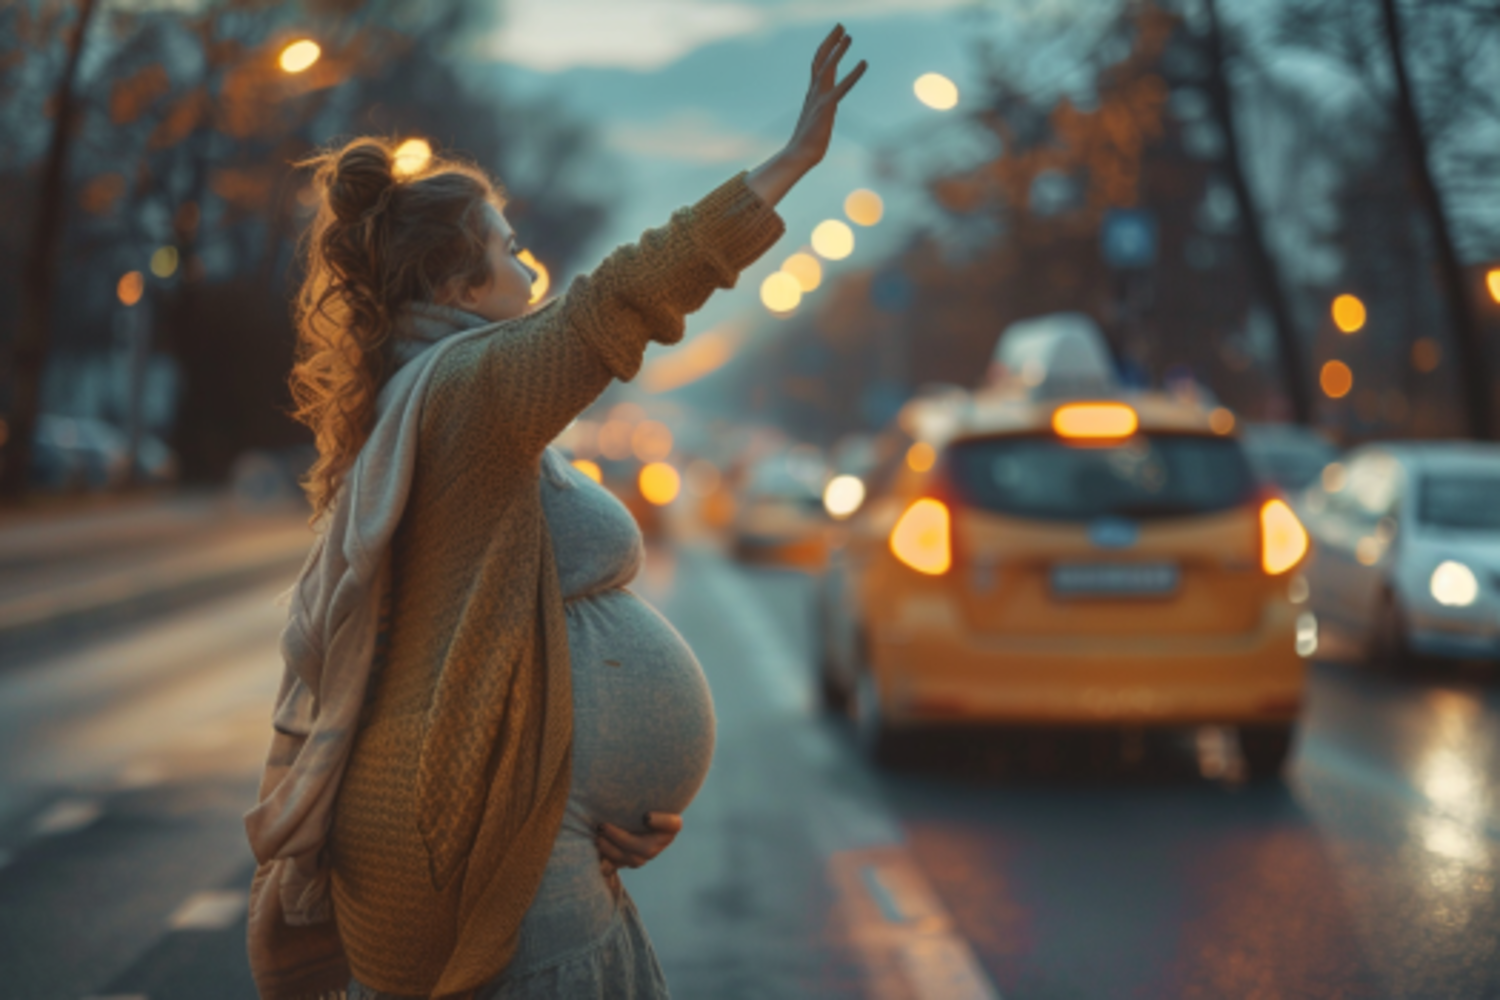 A woman waving at a taxi | Source: Midjourney